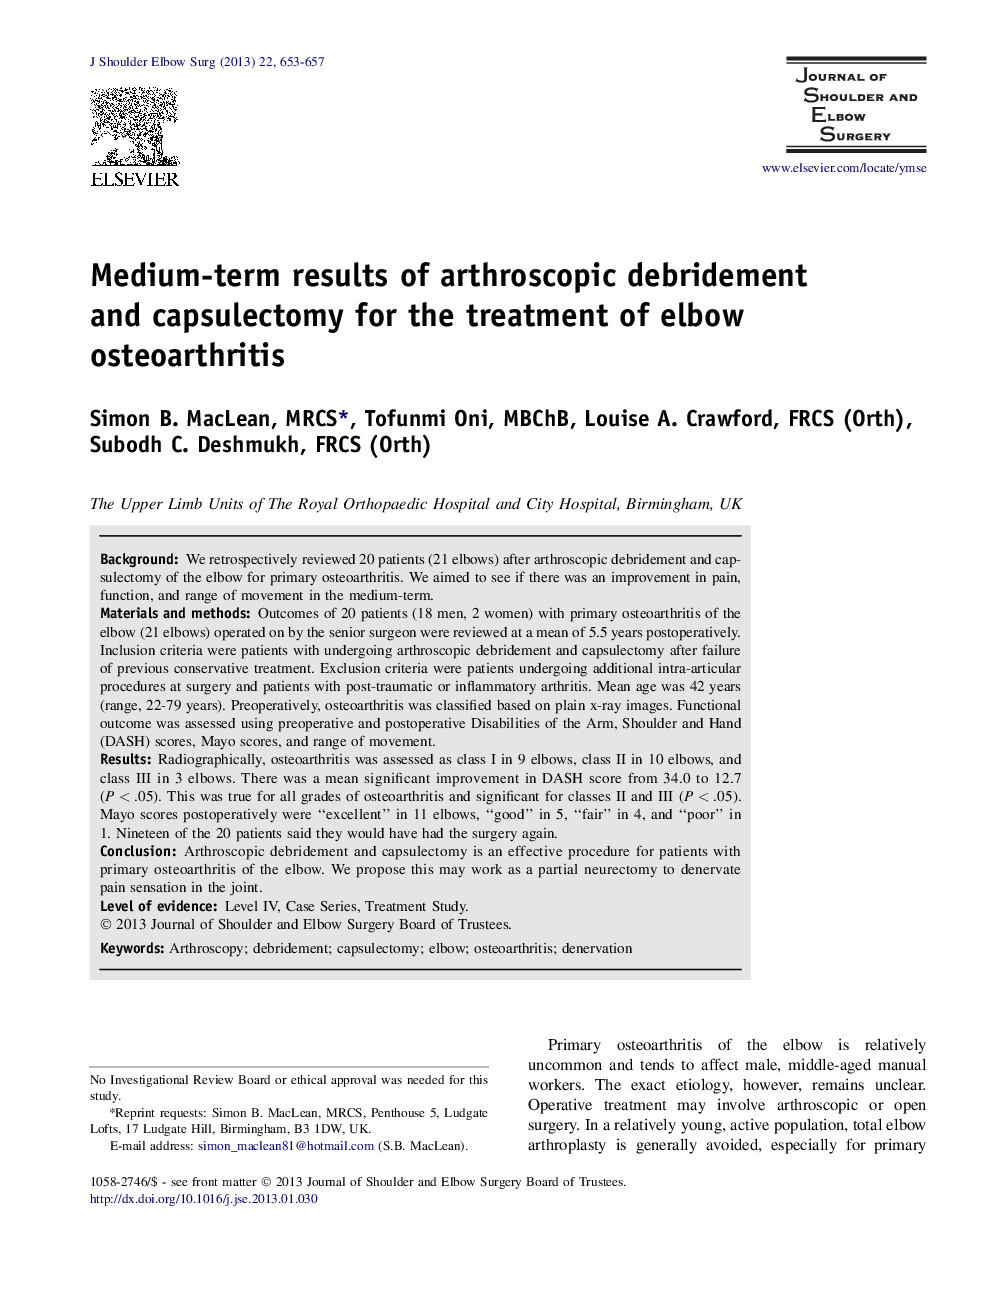 Medium-term results of arthroscopic debridement and capsulectomy for the treatment of elbow osteoarthritis 